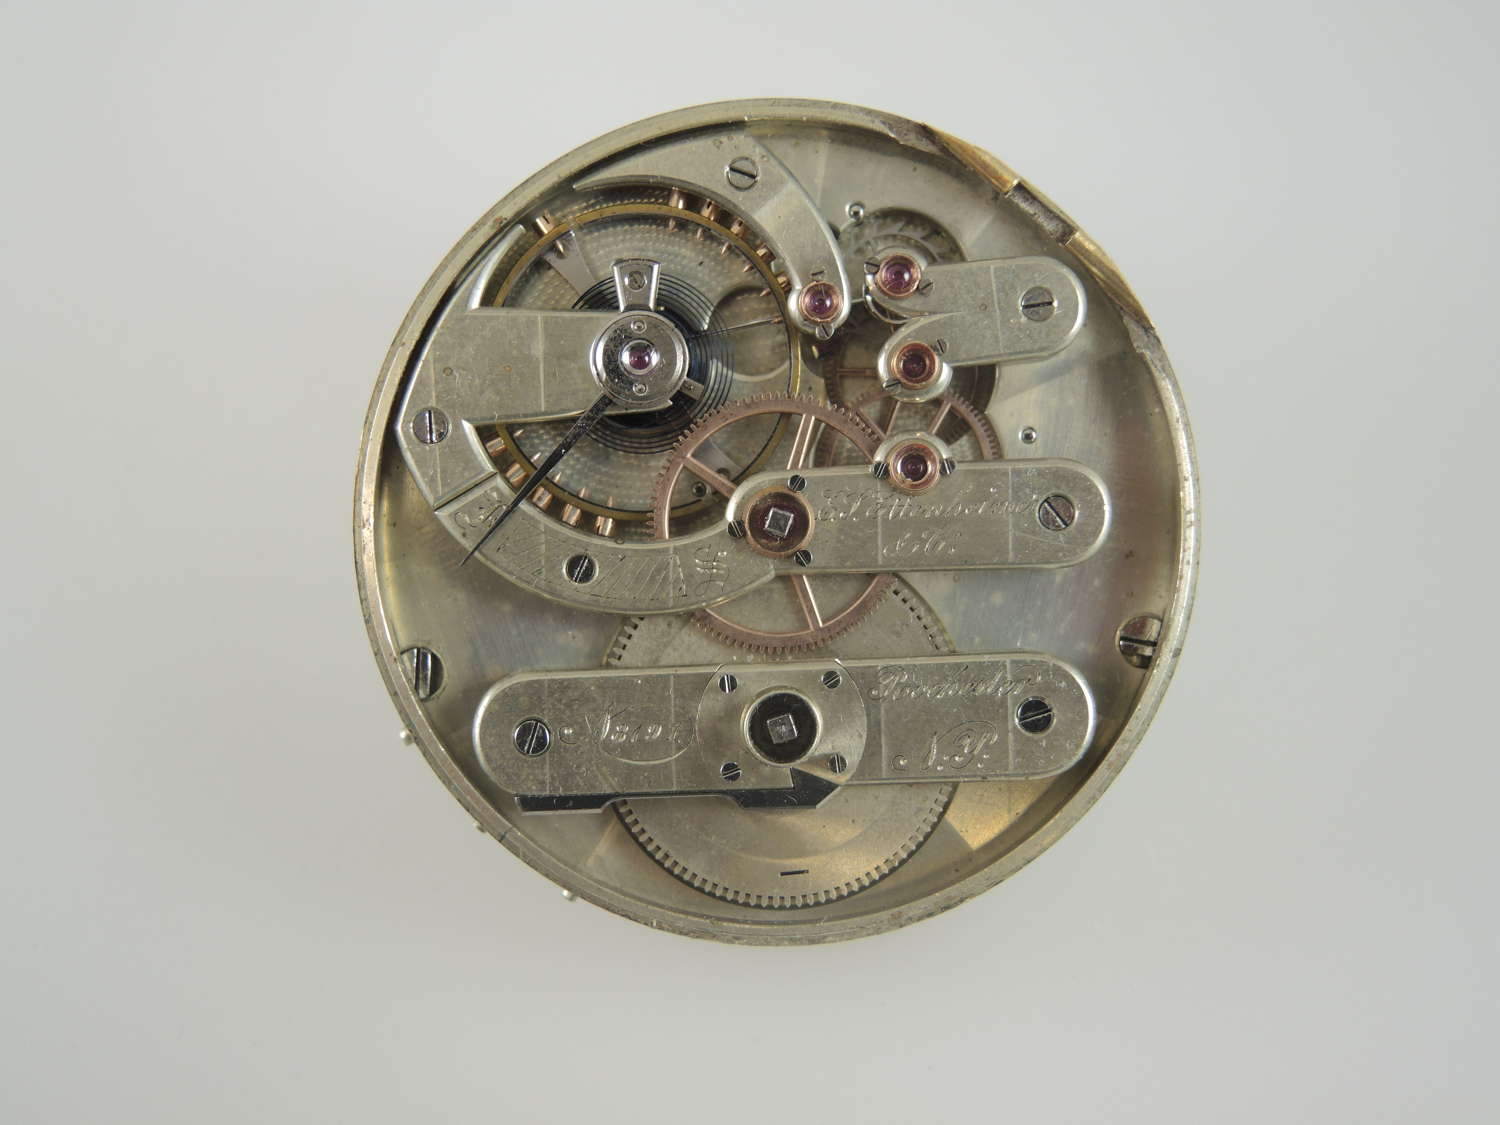 High quality Swiss movement made for American market c1890